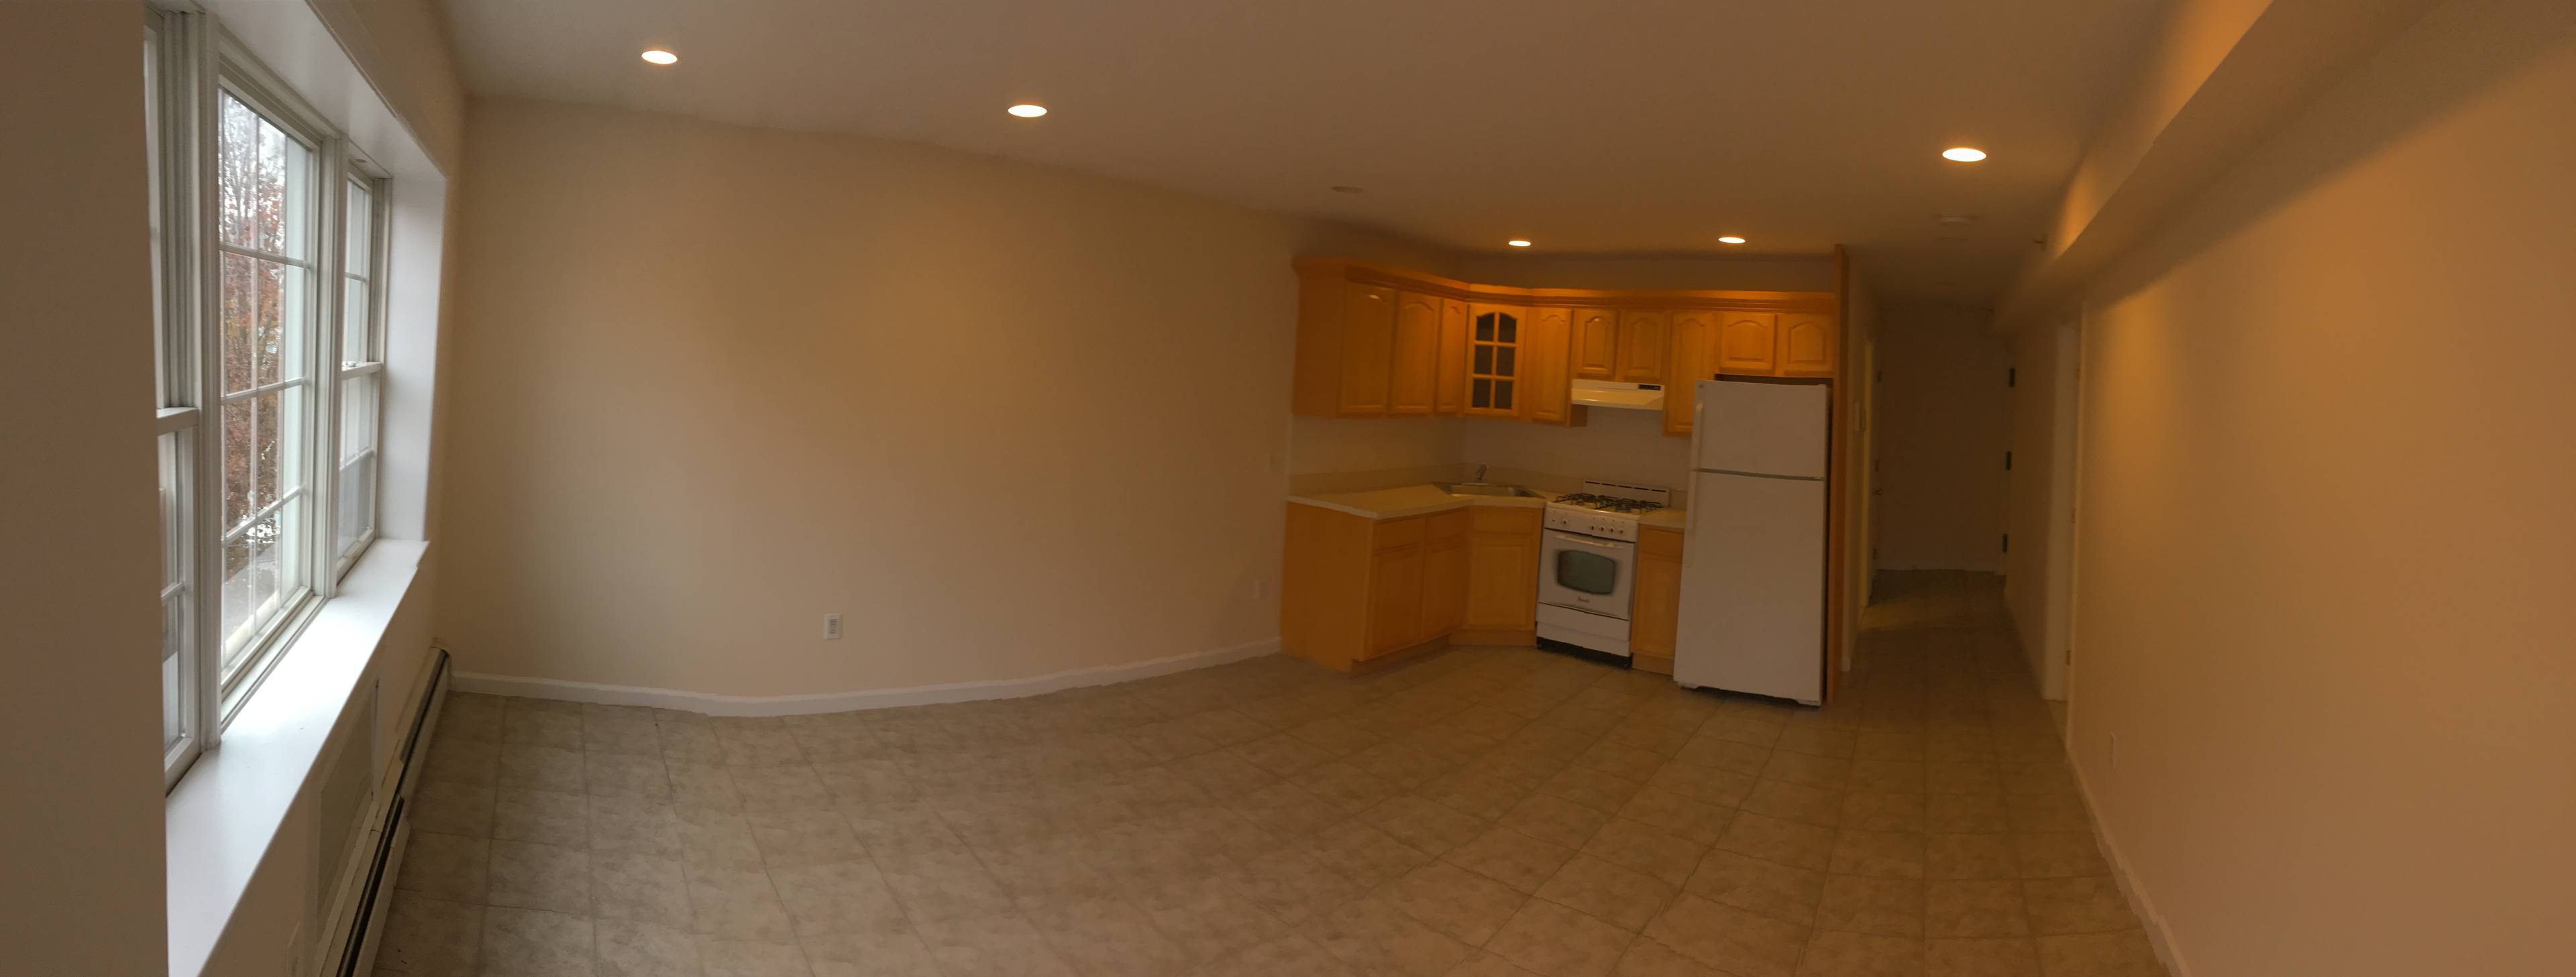 Large one bedroom w/ Balcony and washer/dryer